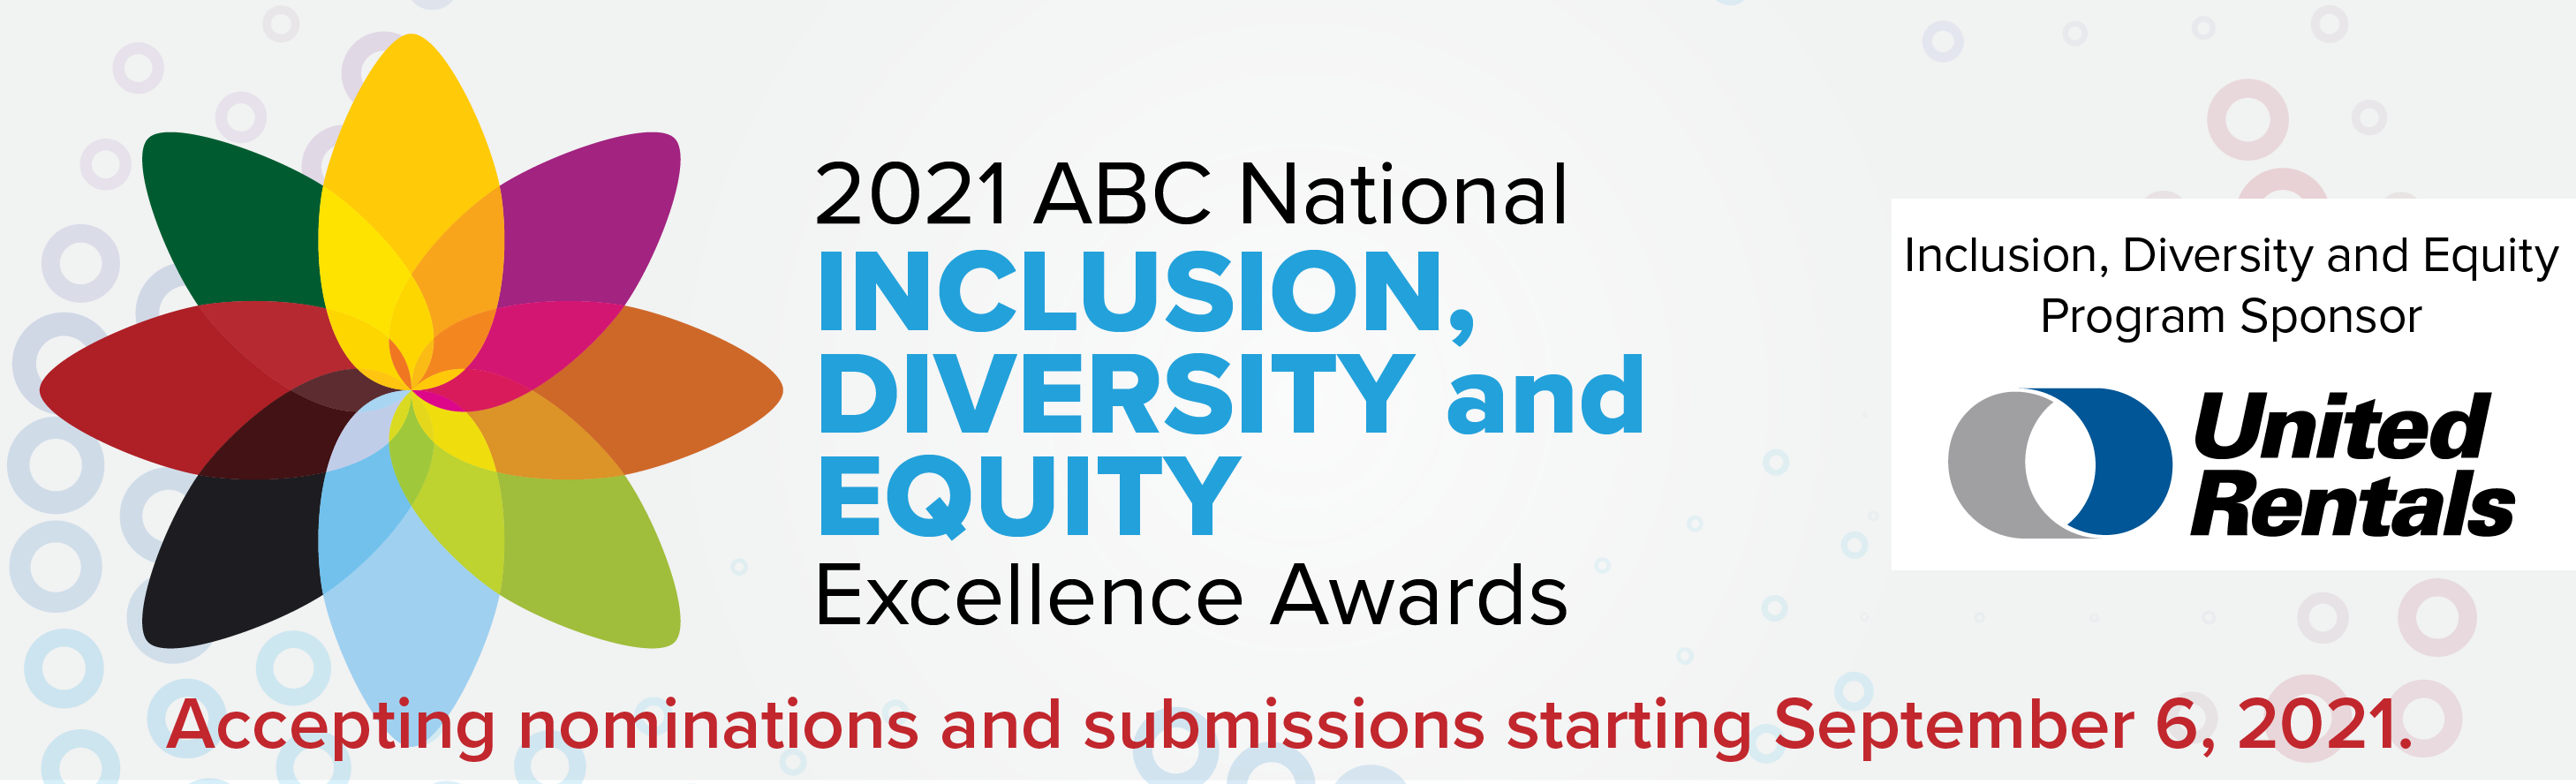 National Inclusion, Diversity and Equity Excellence Awards